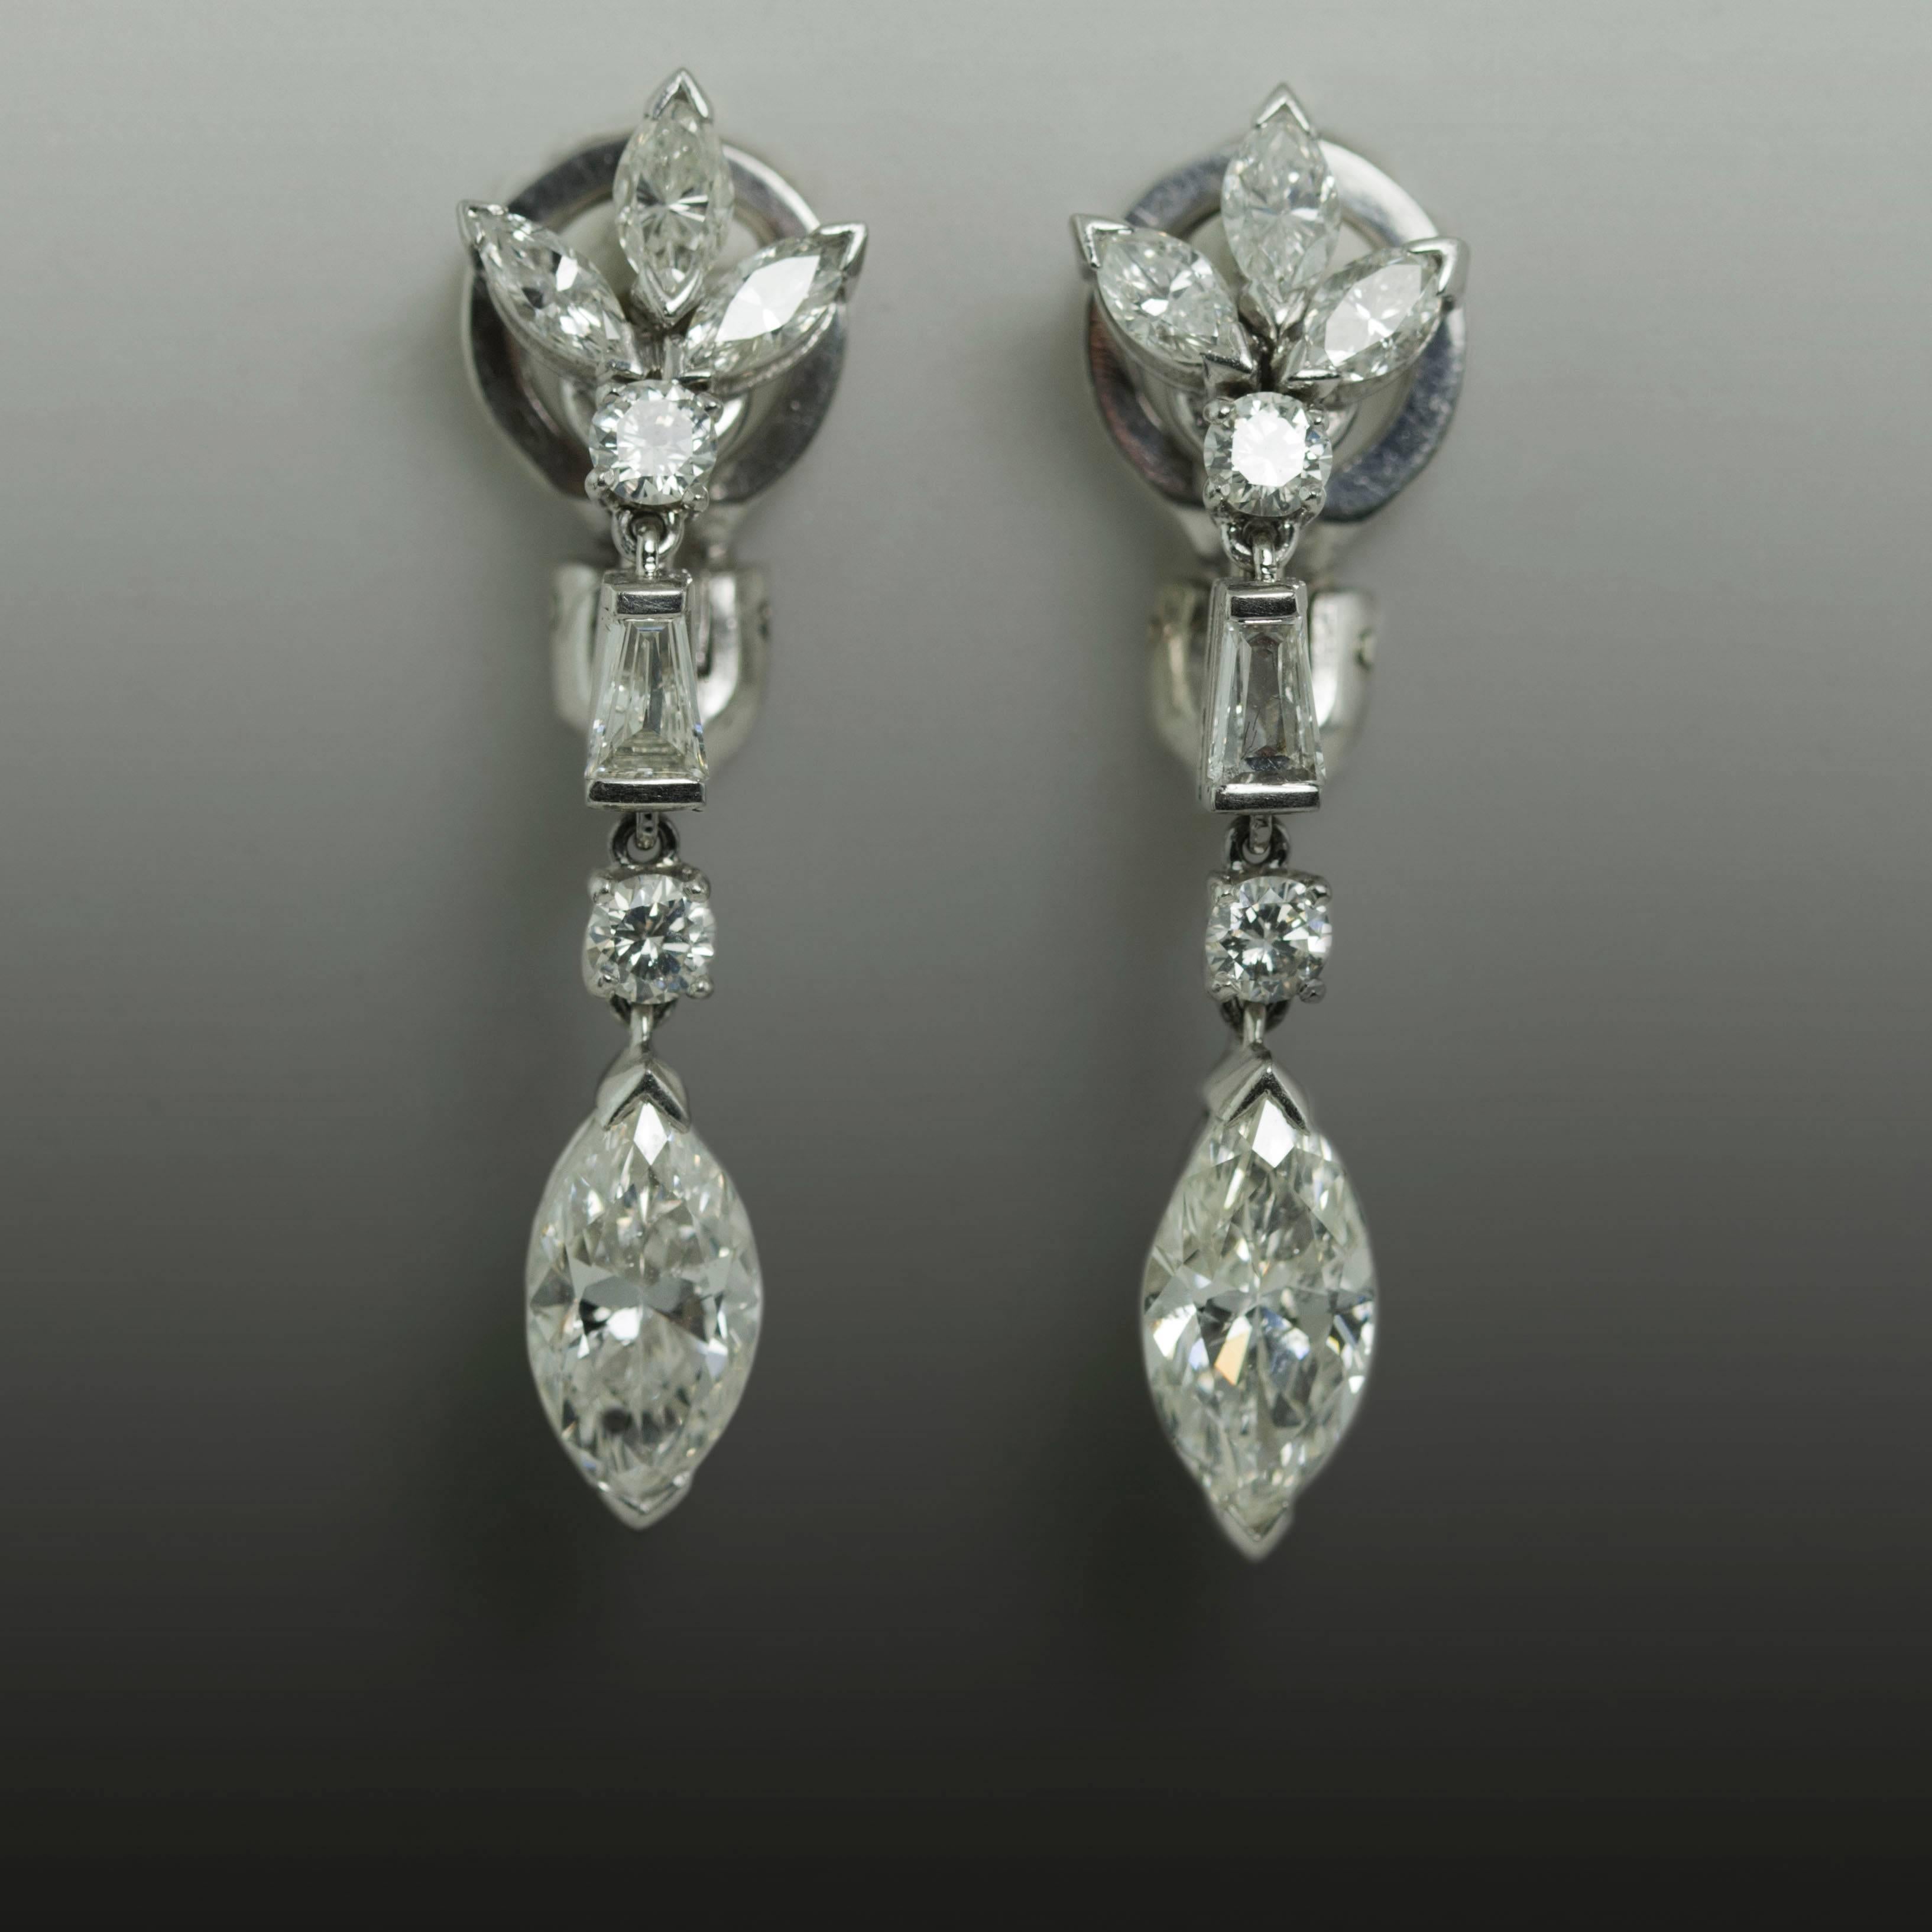 Platinum Earrings containing 2 Marquise cut diamonds weighing approximately 3.10 carats and 6 smaller Marquise cut diamonds, 2 round diamonds and 2 baguette cut diamonds weighing approximately 1.00 carats.